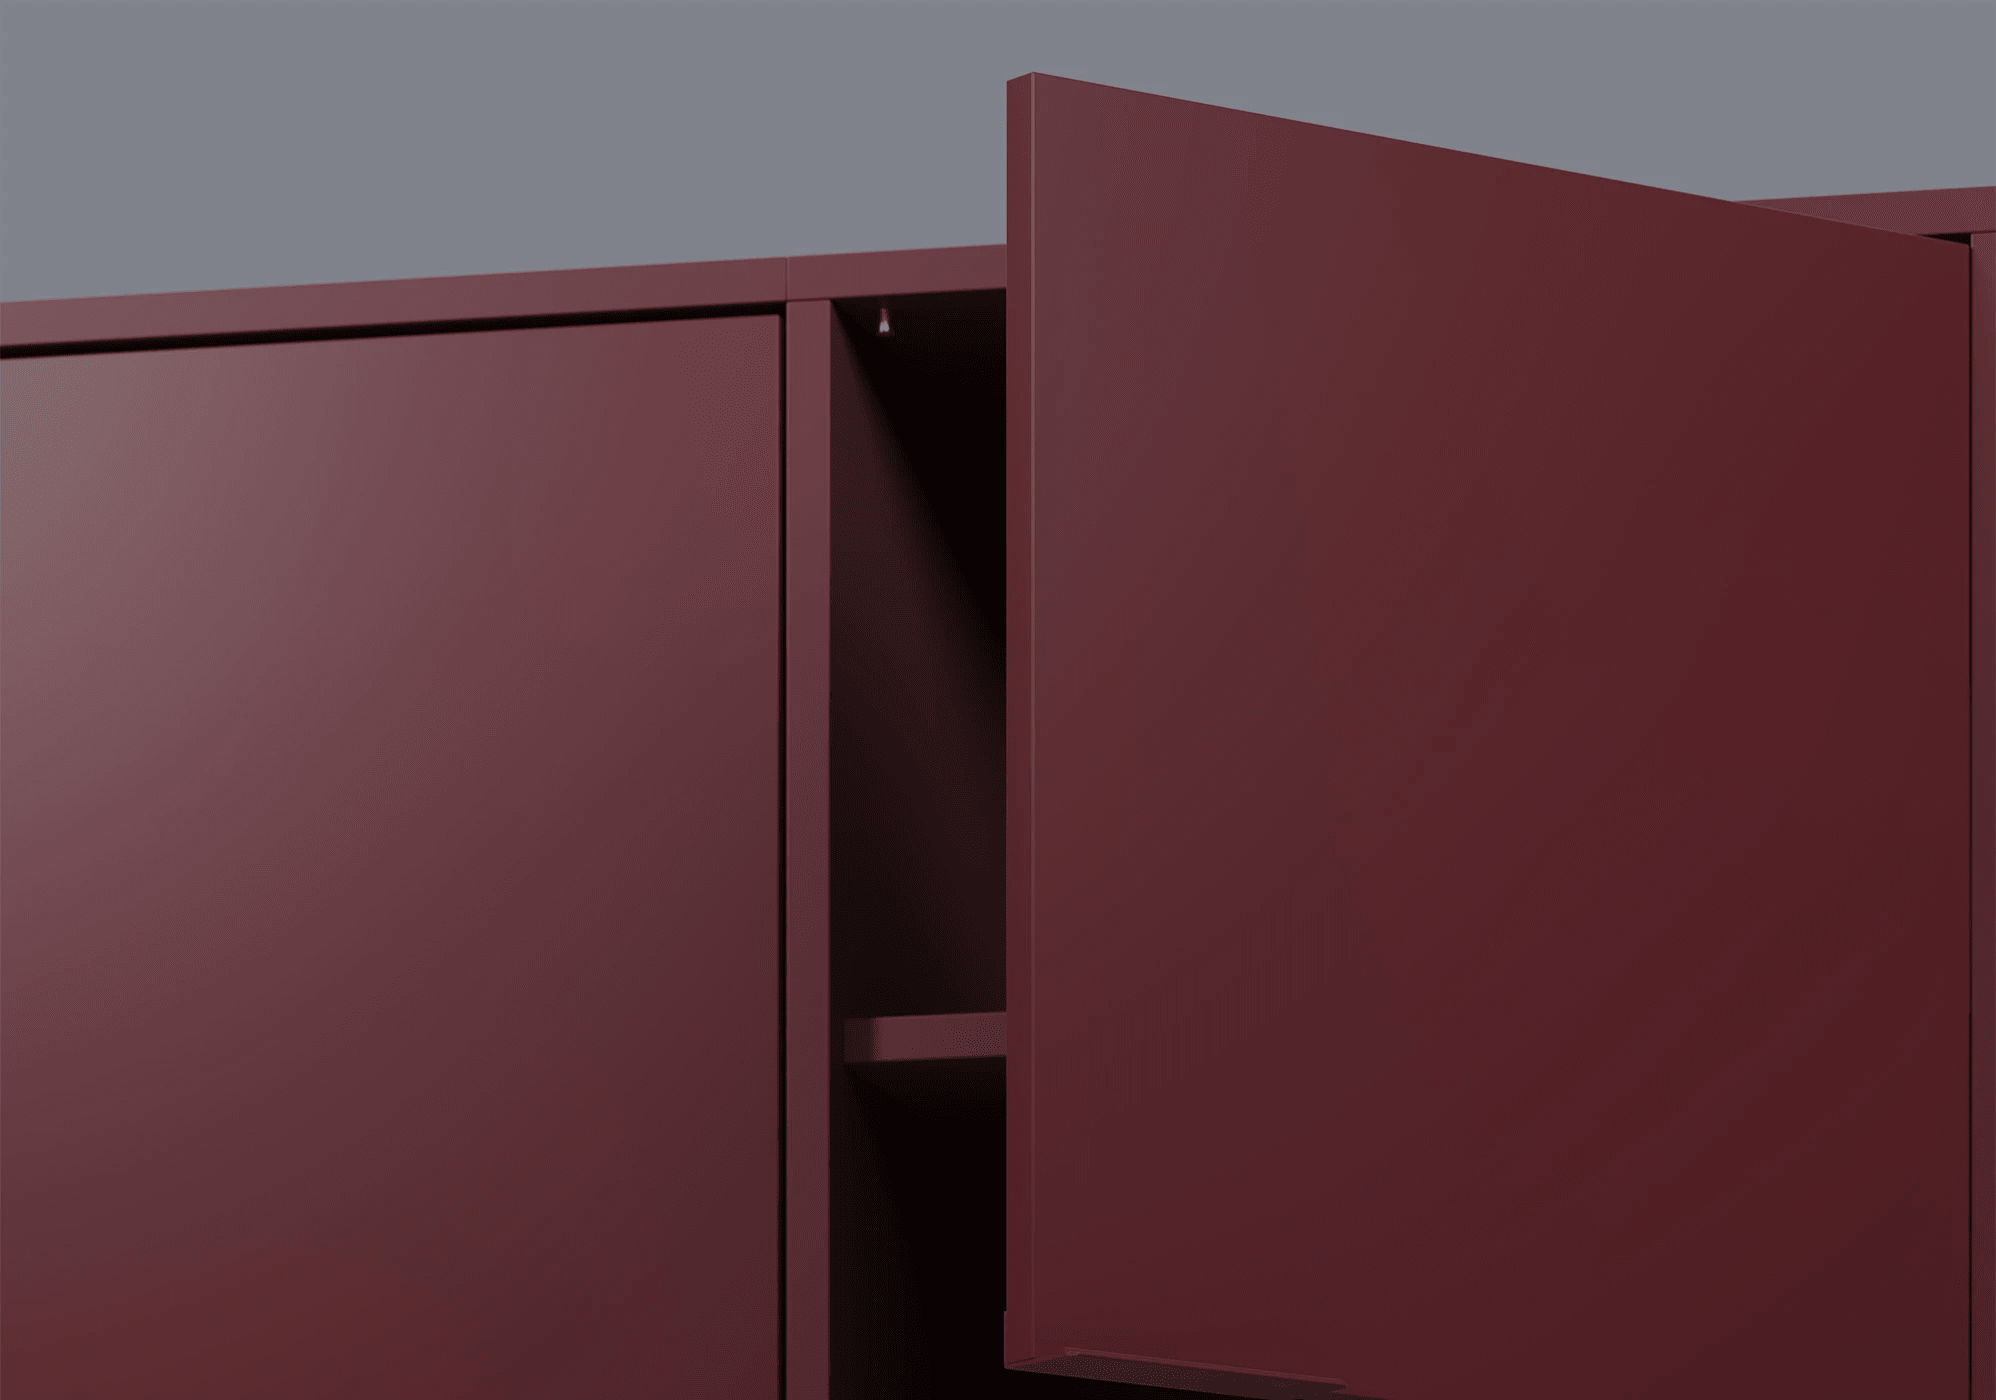 Large Burgundy Red Shoe Rack with Drawers - 217x63x40cm 8